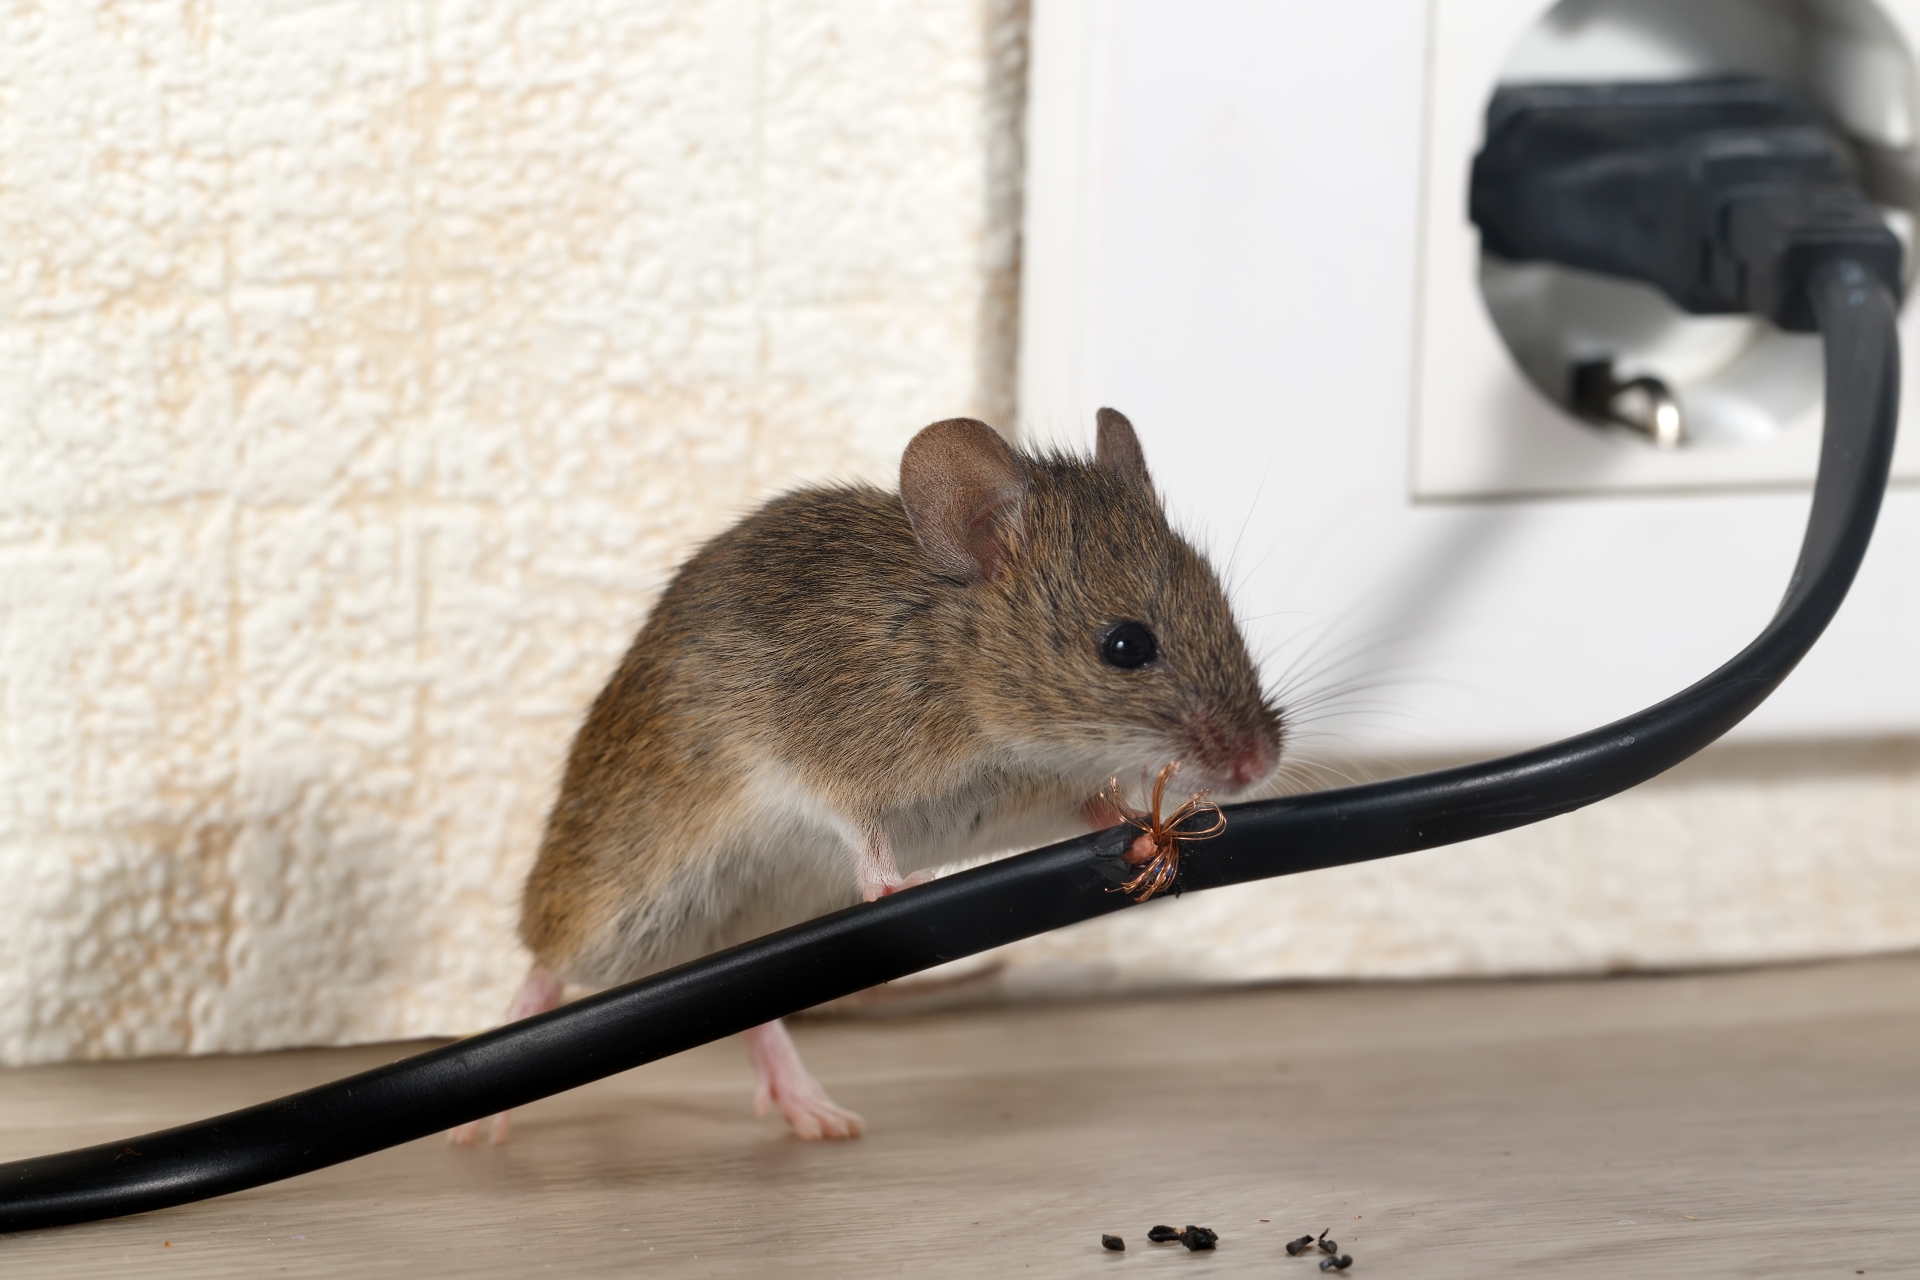 Mice Infestation, Pest Control in Hounslow, Lampton, TW3. Call Now 020 8166 9746